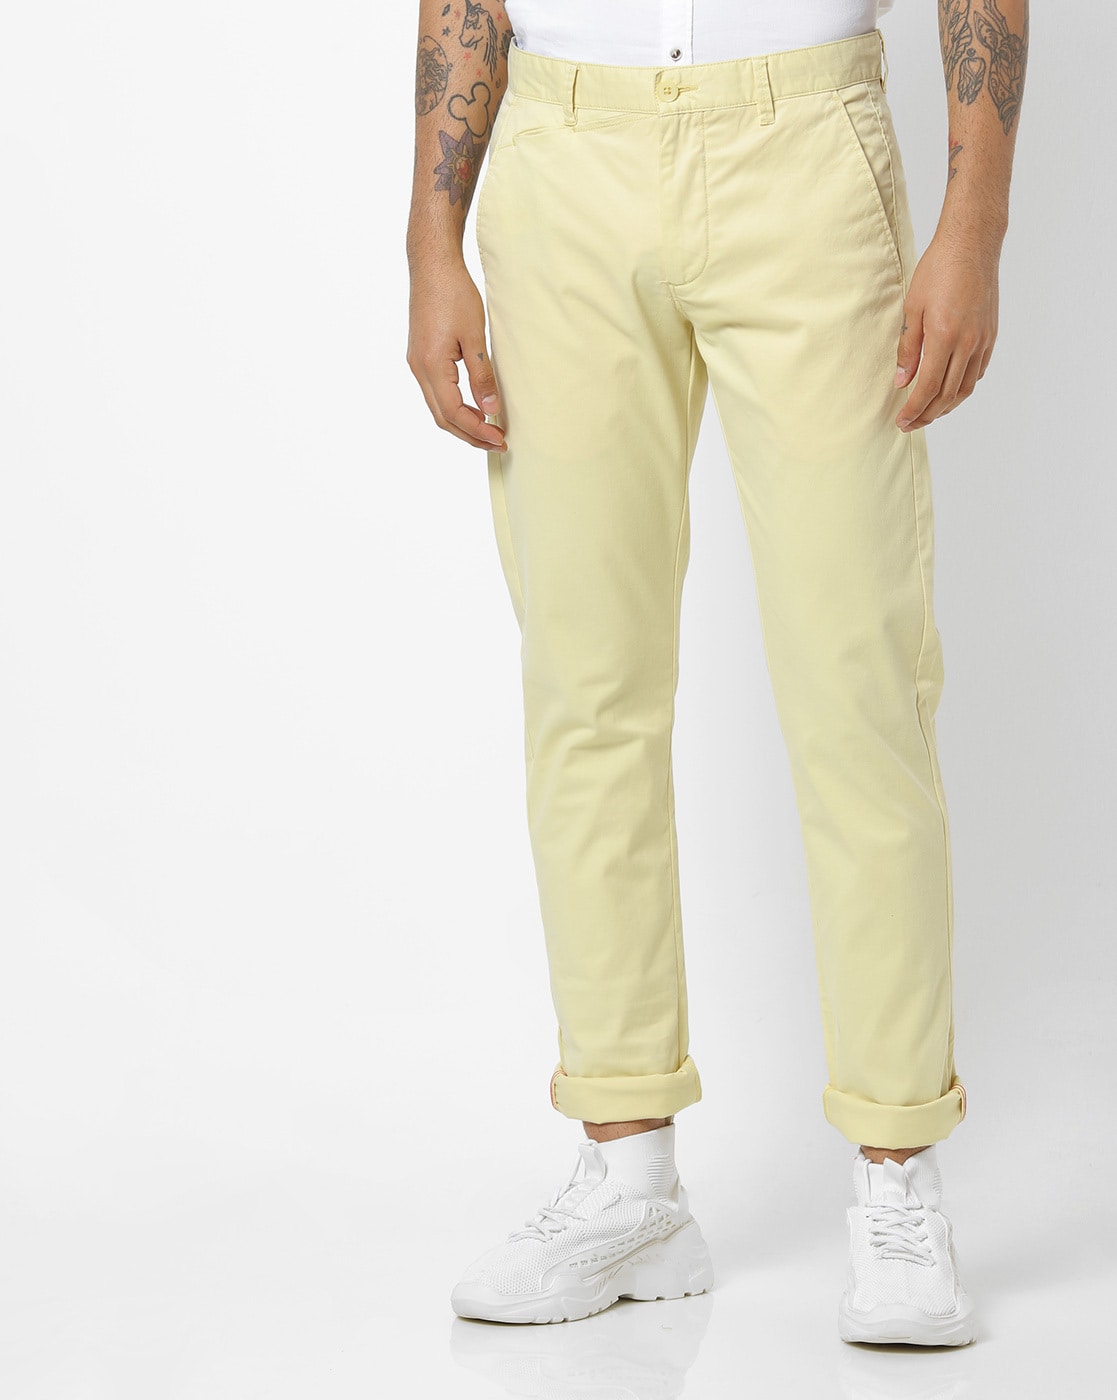 Buy Beige Trousers  Pants for Men by ONLY VIMALAPPAREL Online  Ajiocom